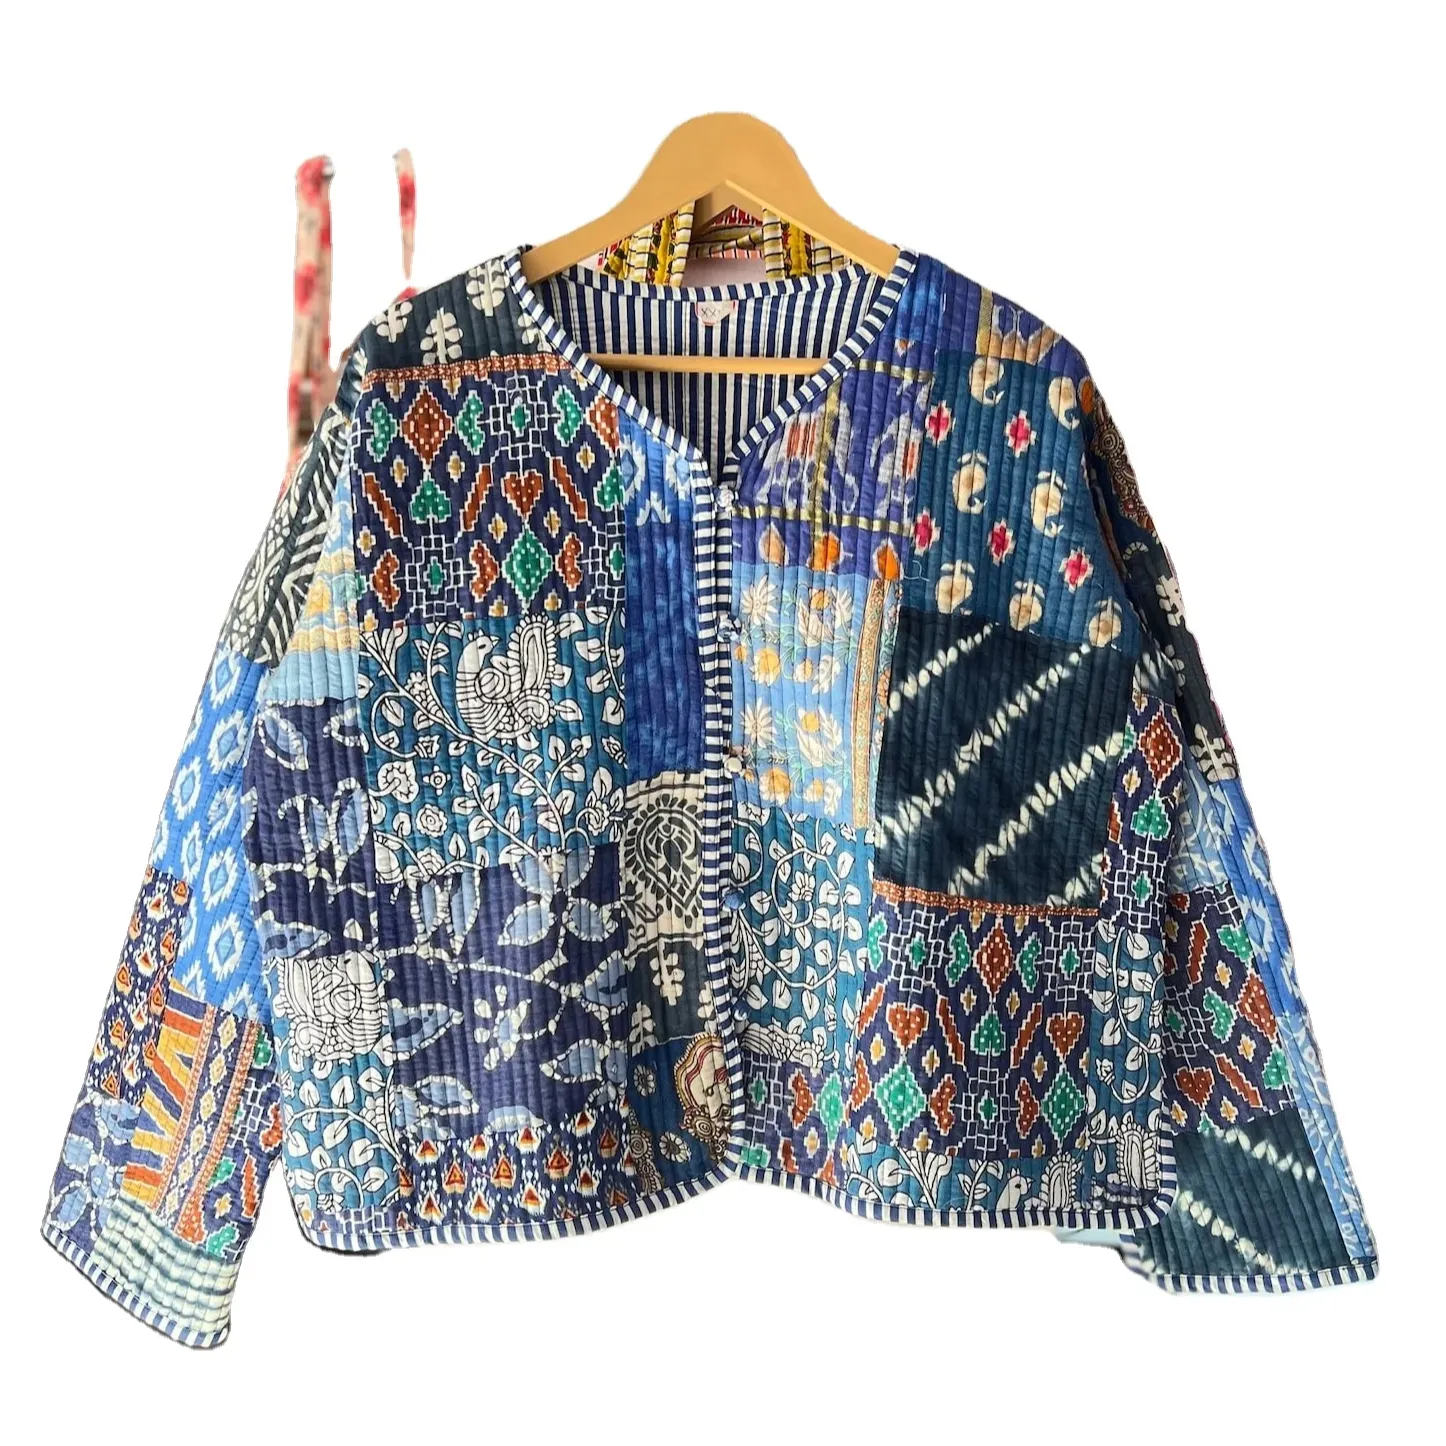 Patchwork Quilted Jackets Cotton Bohemian Style Fall Winter Jacket Coat Streetwear Boho Quilted Reversible Jacket